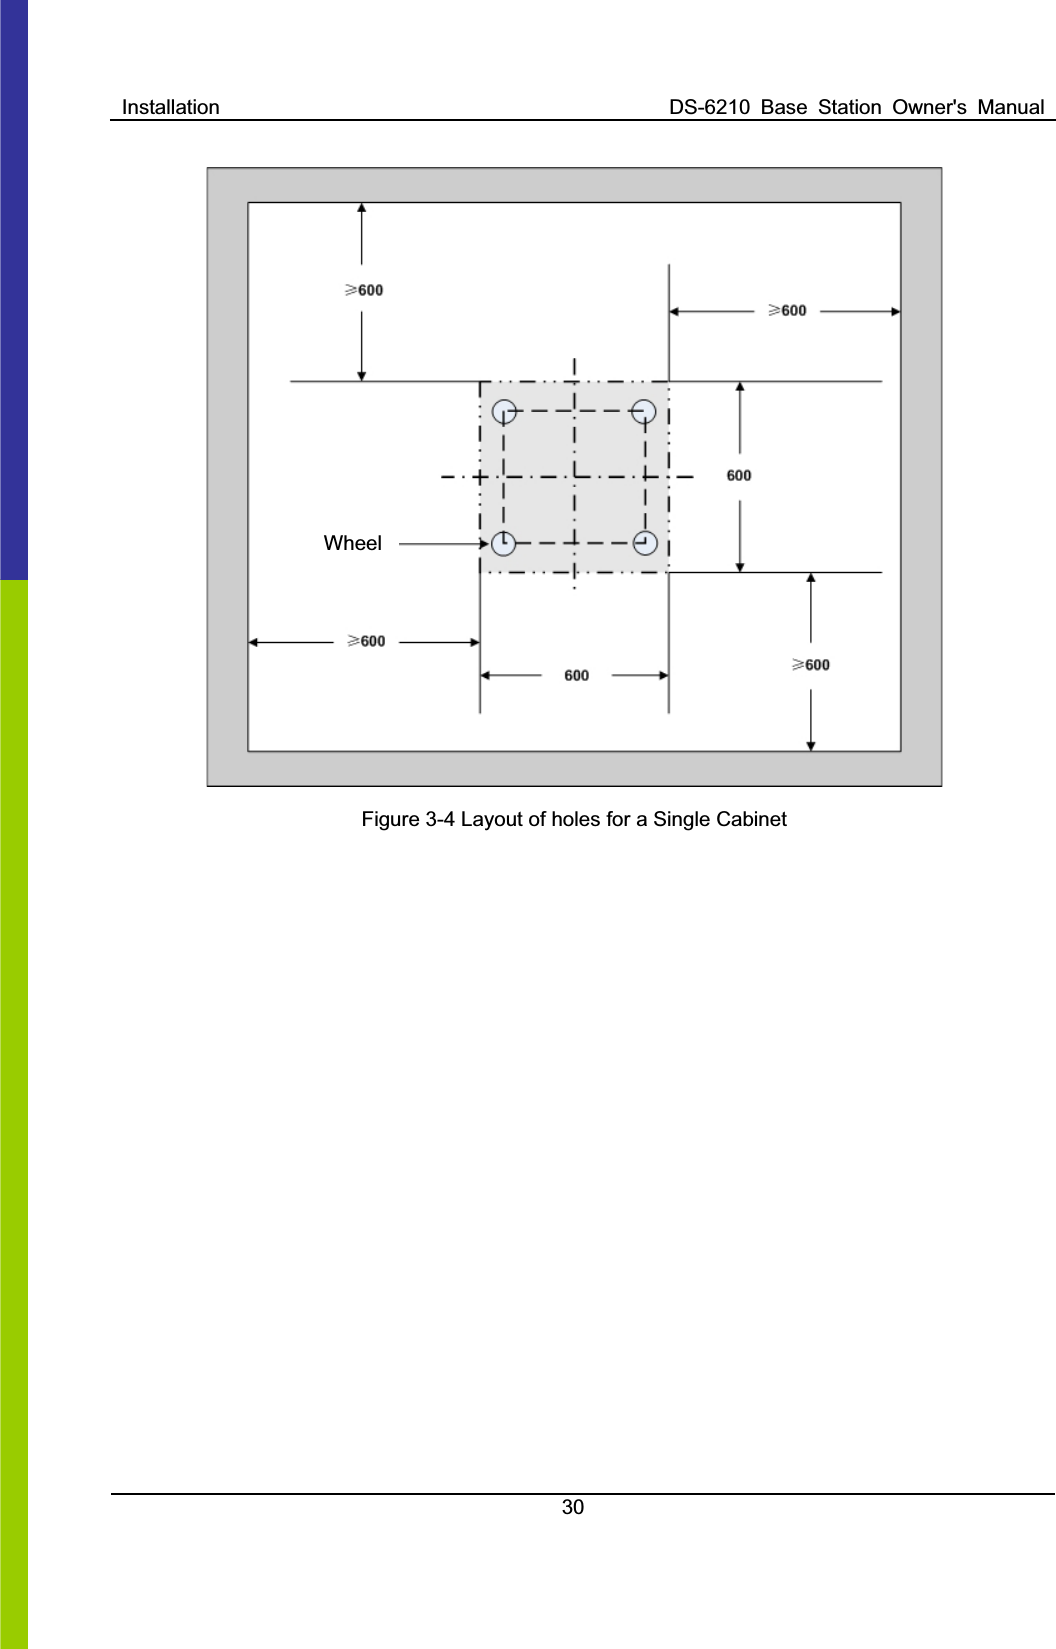 Installation  DS-6210  Base  Station  Owner&apos;s  Manual30Figure 3-4 Layout of holes for a Single Cabinet   Wheel